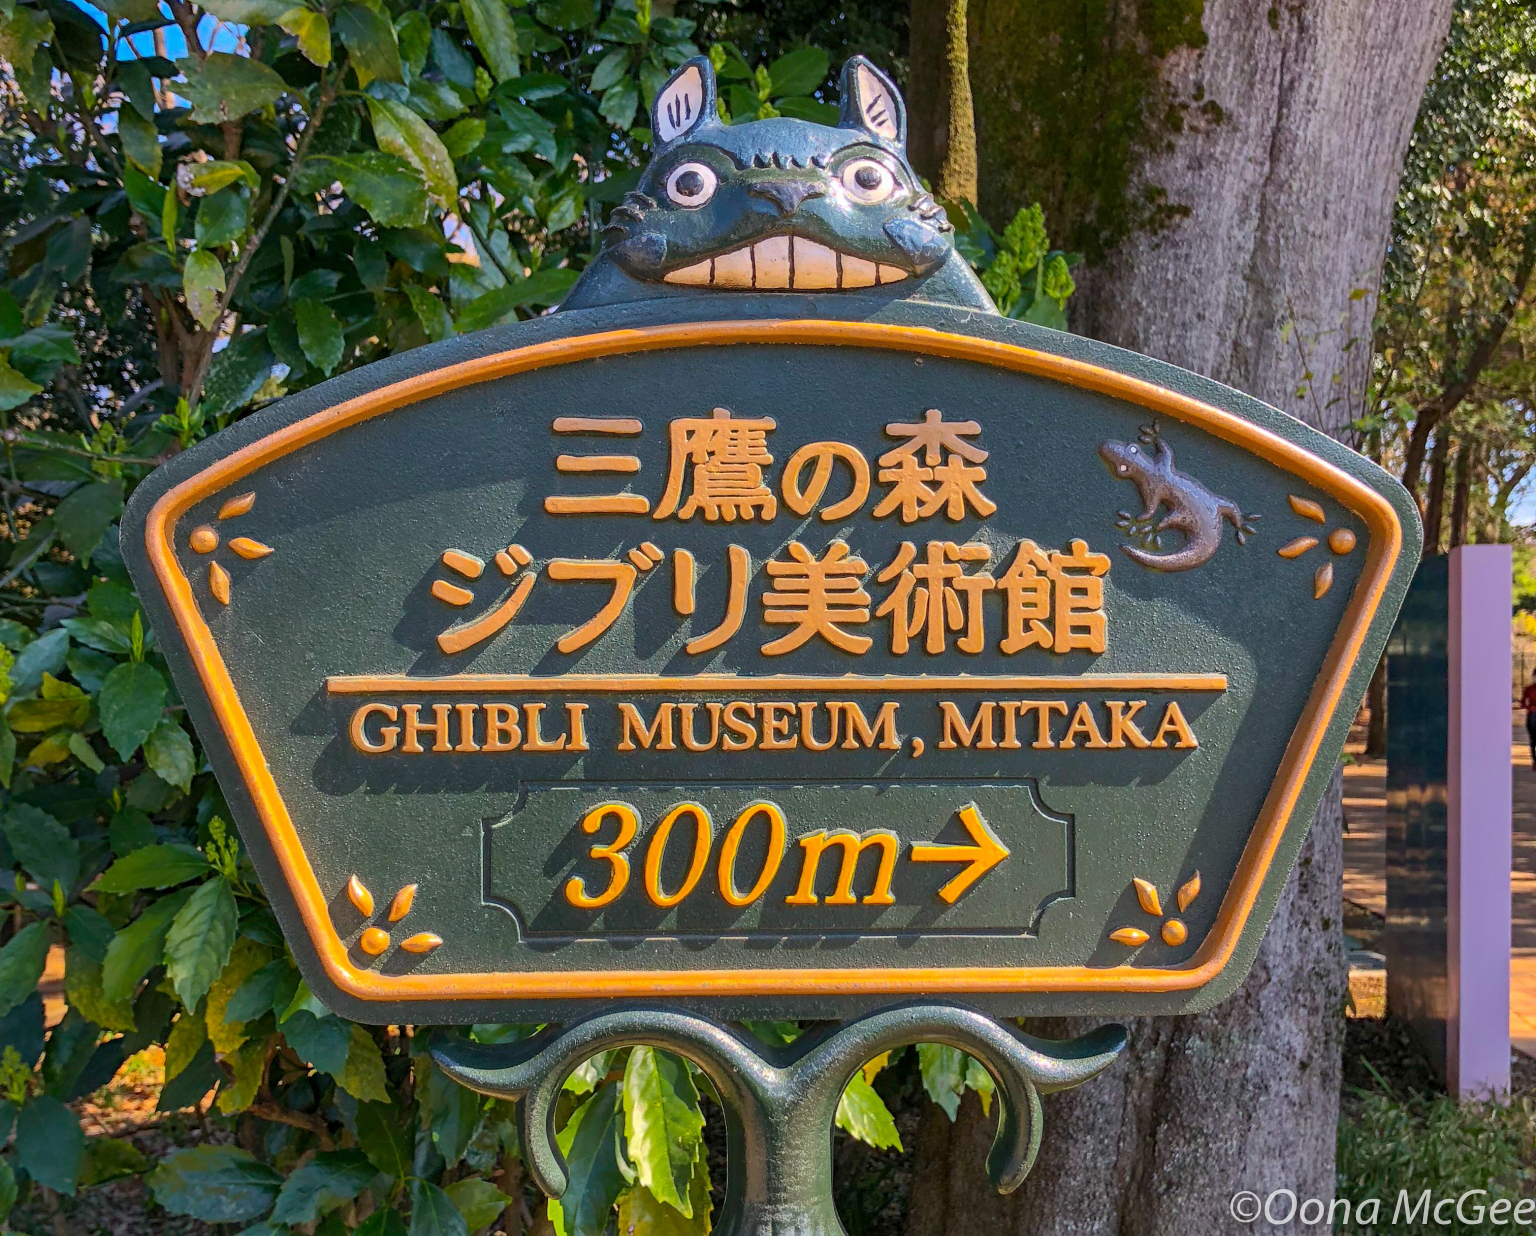 Studio Ghibli reveals mystery hidden on coat of arms and outdoor signs at Ghibli  Museum | SoraNews24 -Japan News-